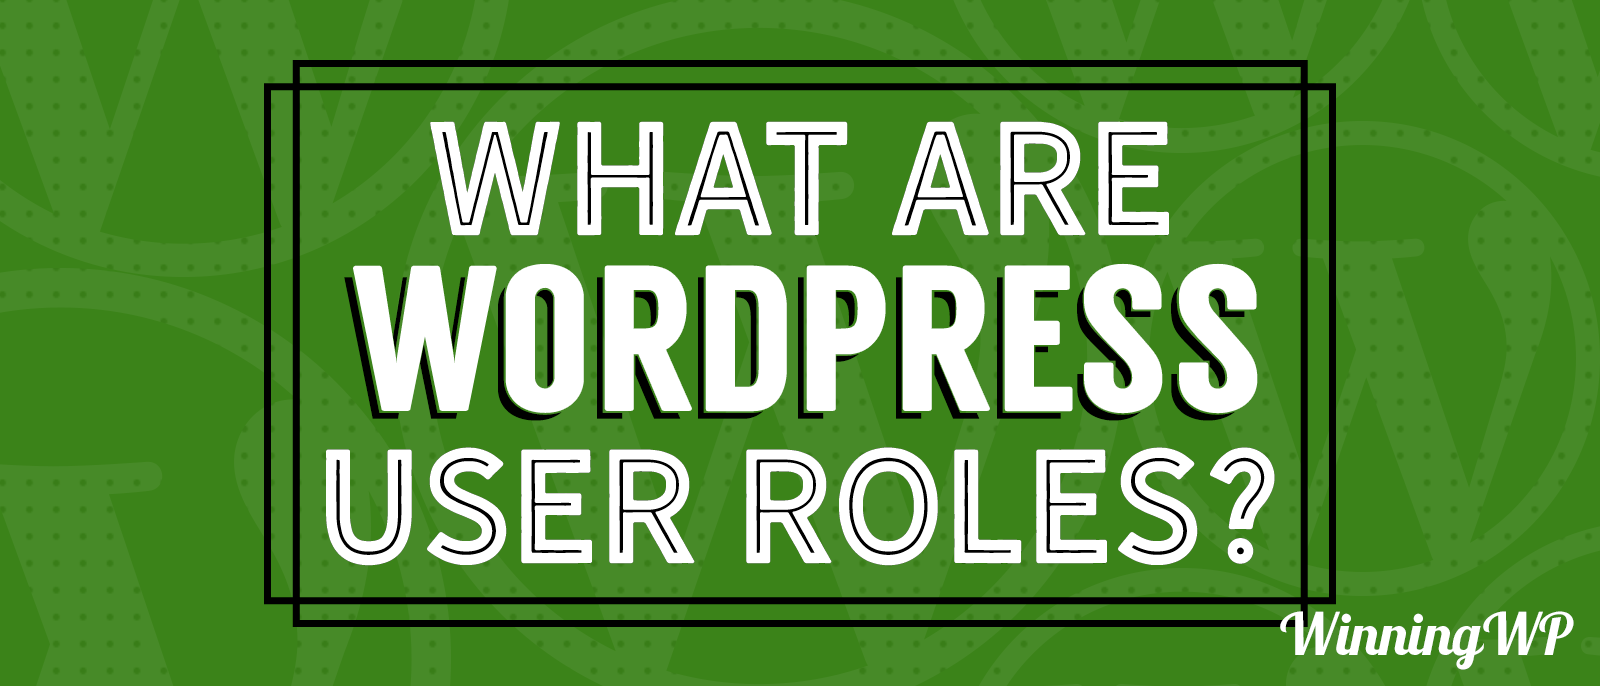 What are WordPress User Roles?